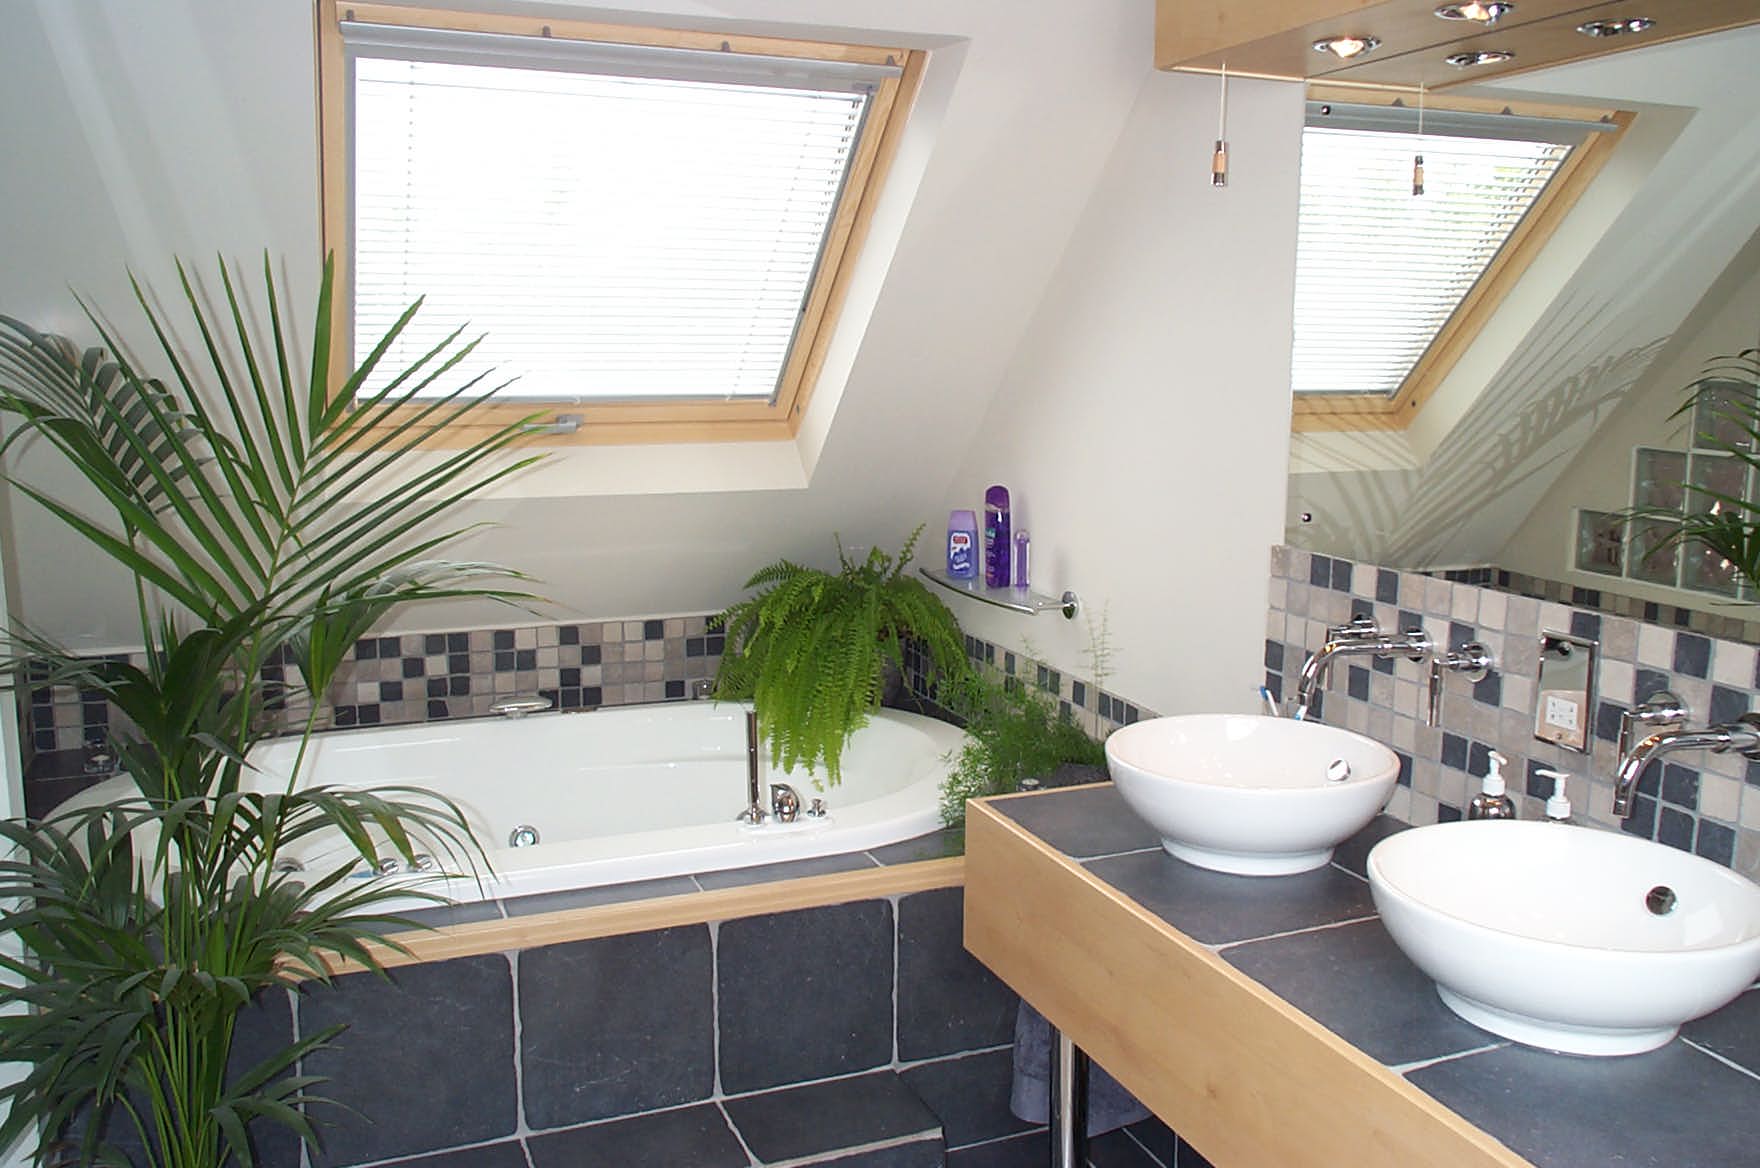 A bathroom as part of a fantastic loft conversion in the home